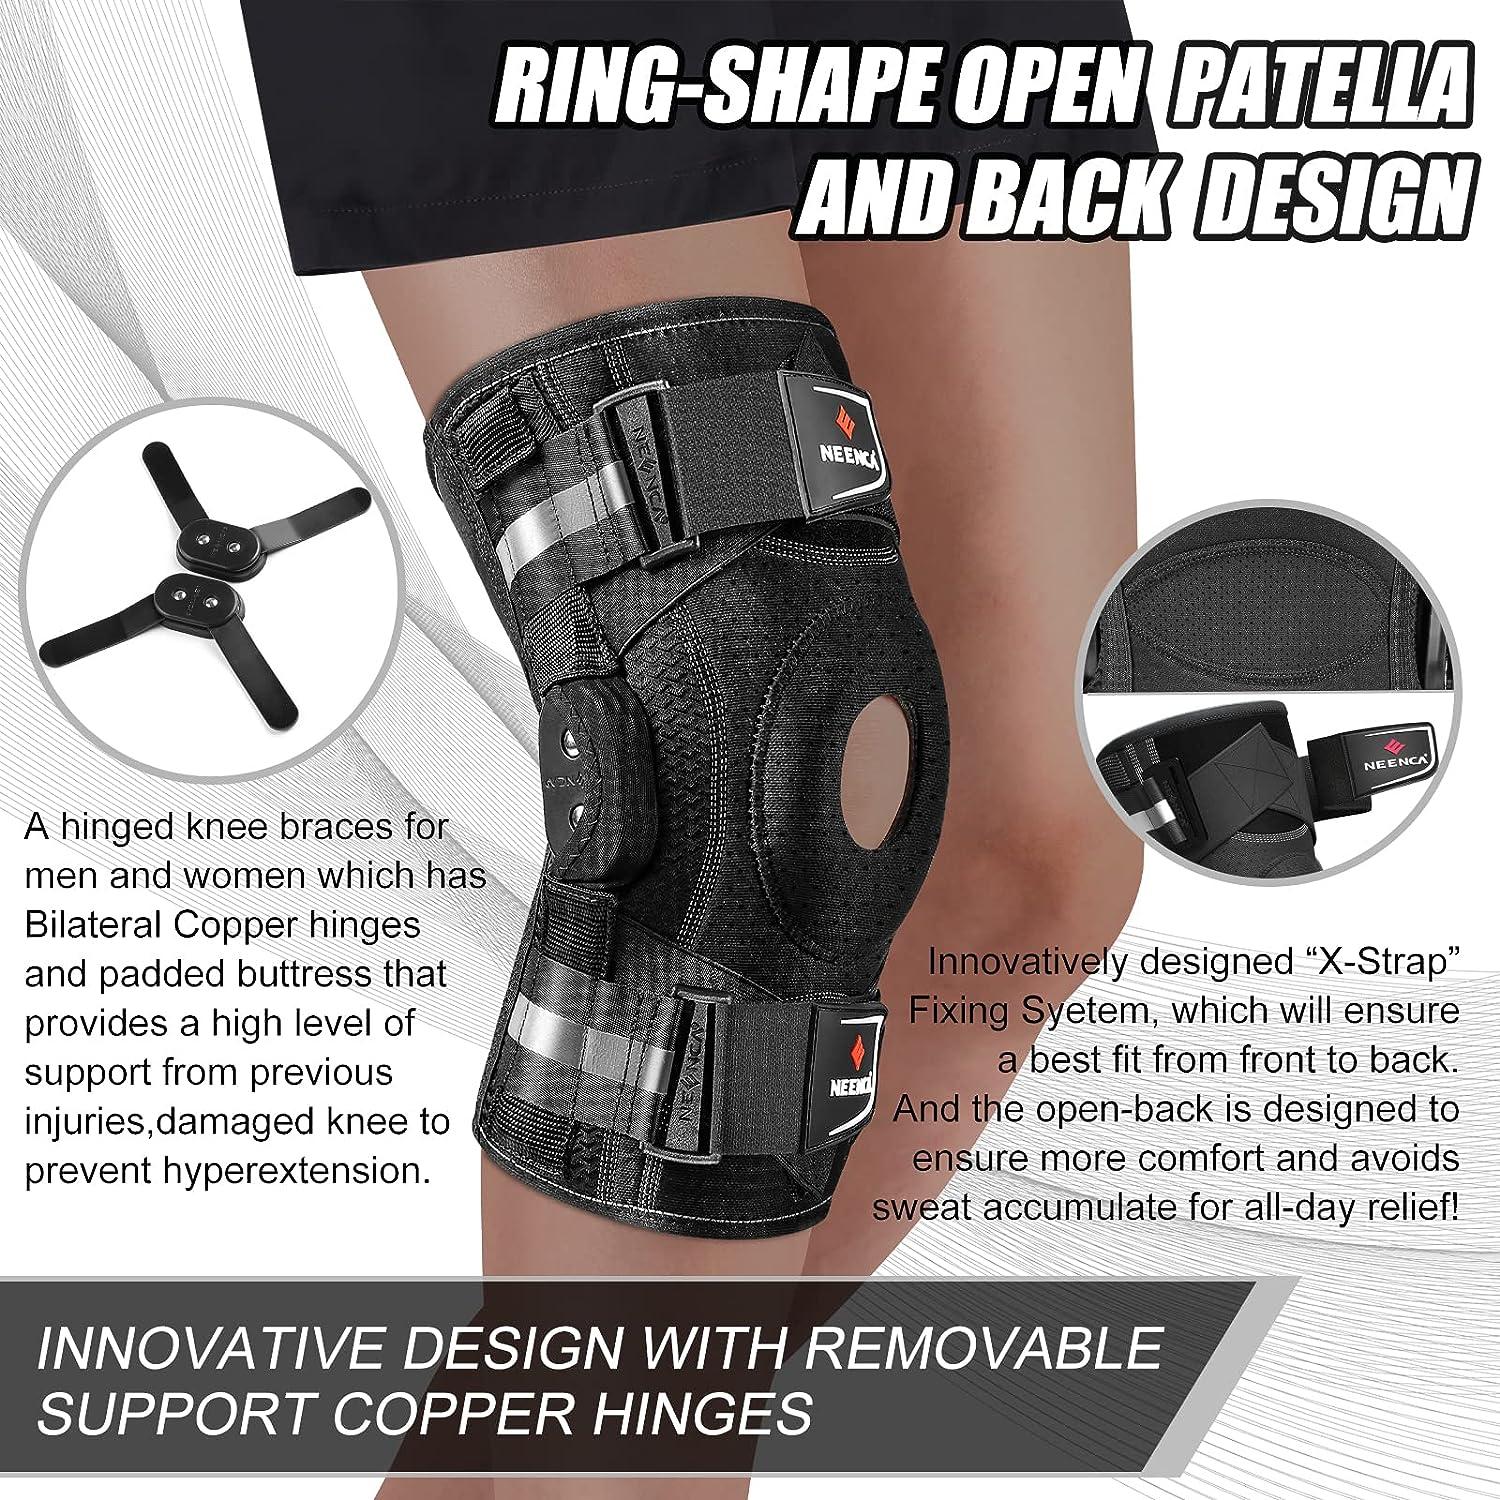 Ace Adjustable Knee Brace with Dural Side Stabilizers